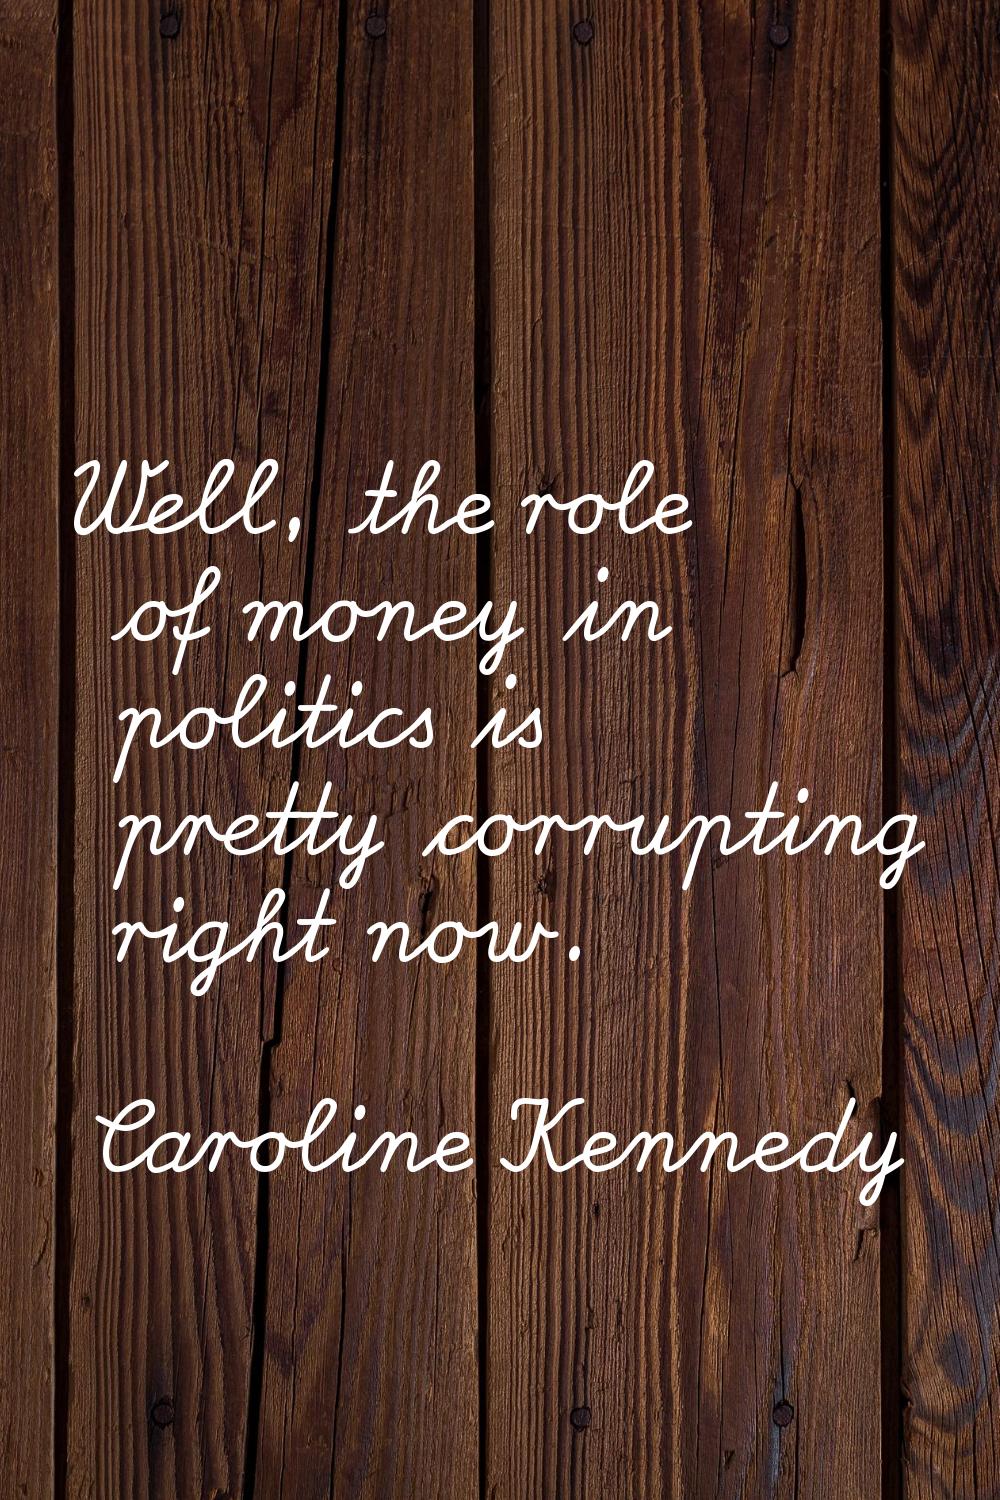 Well, the role of money in politics is pretty corrupting right now.